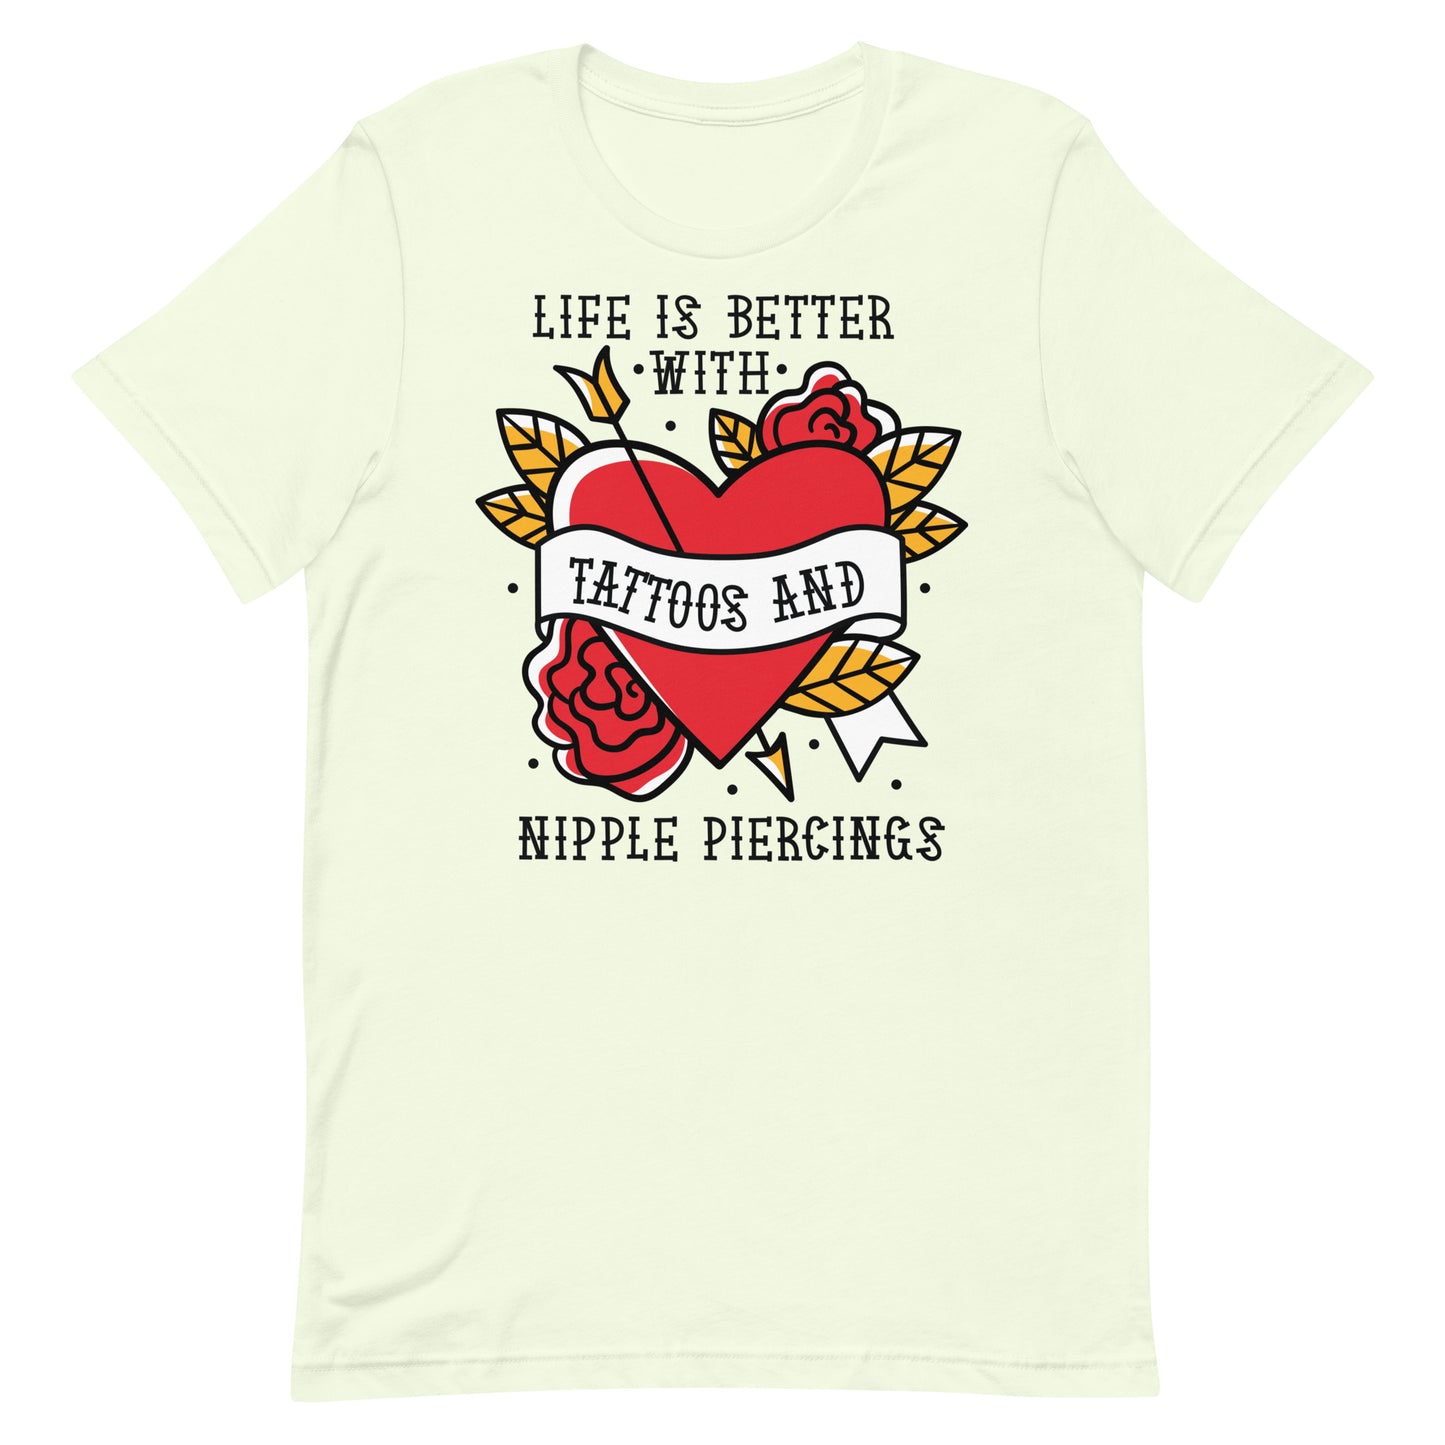 Life is Better With Tattoos and Nipple Piercings Unisex t-shirt